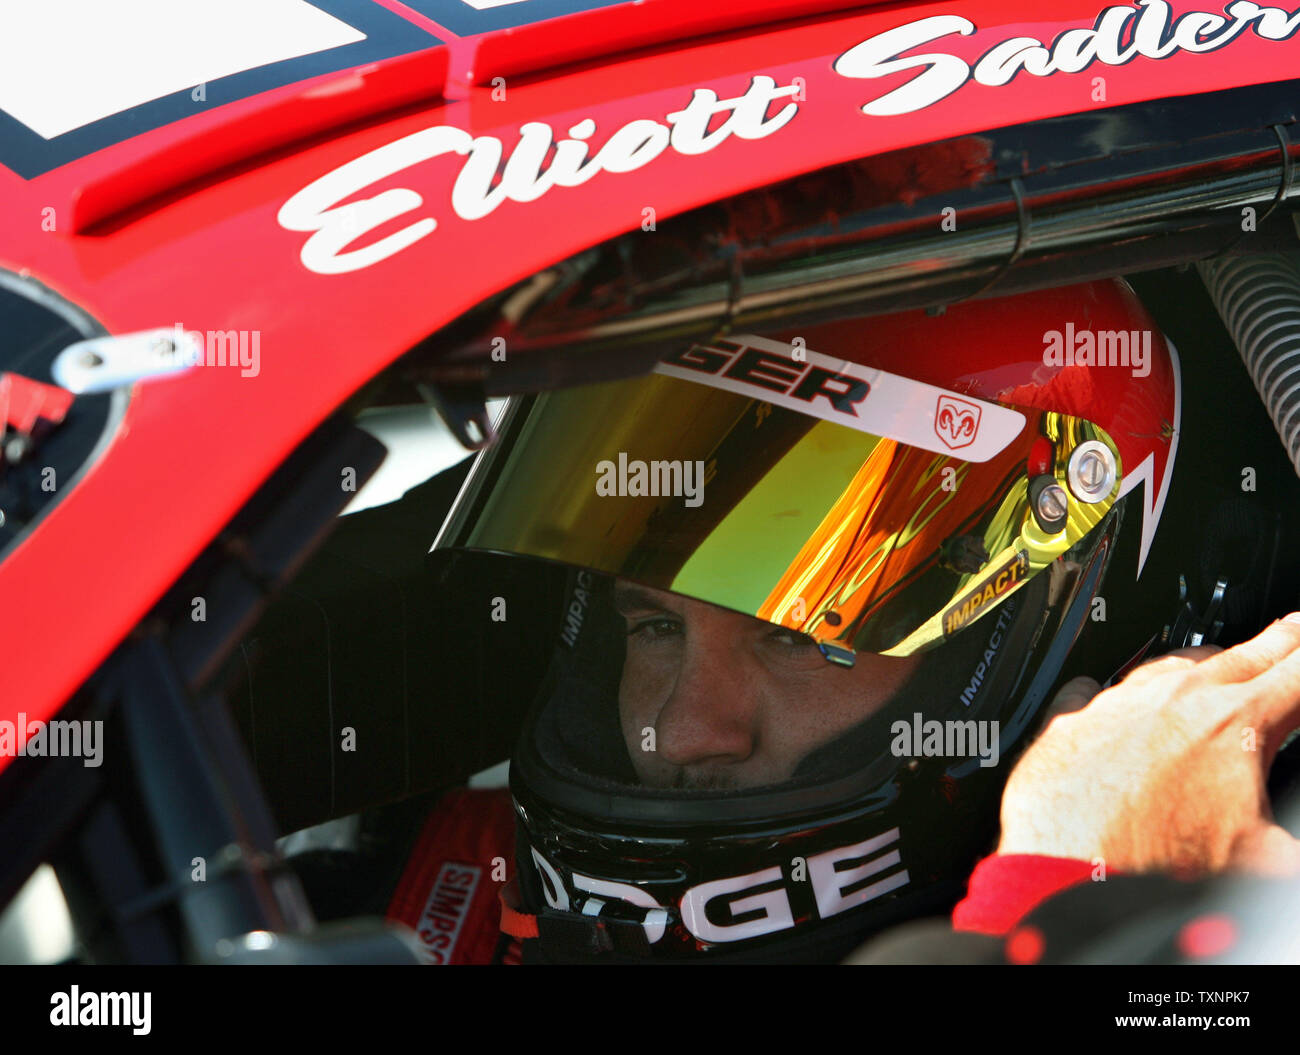 Nascar driver Elliott Sadler waits in his car for the start of the GFS Marketplace 400 at the Michigan International Speedway in Brooklyn, Michigan on August 20, 2006.  Sadler, who started the race in the second position, finished in tenth place.  (UPI Photo/Scott R. Galvin) Stock Photo